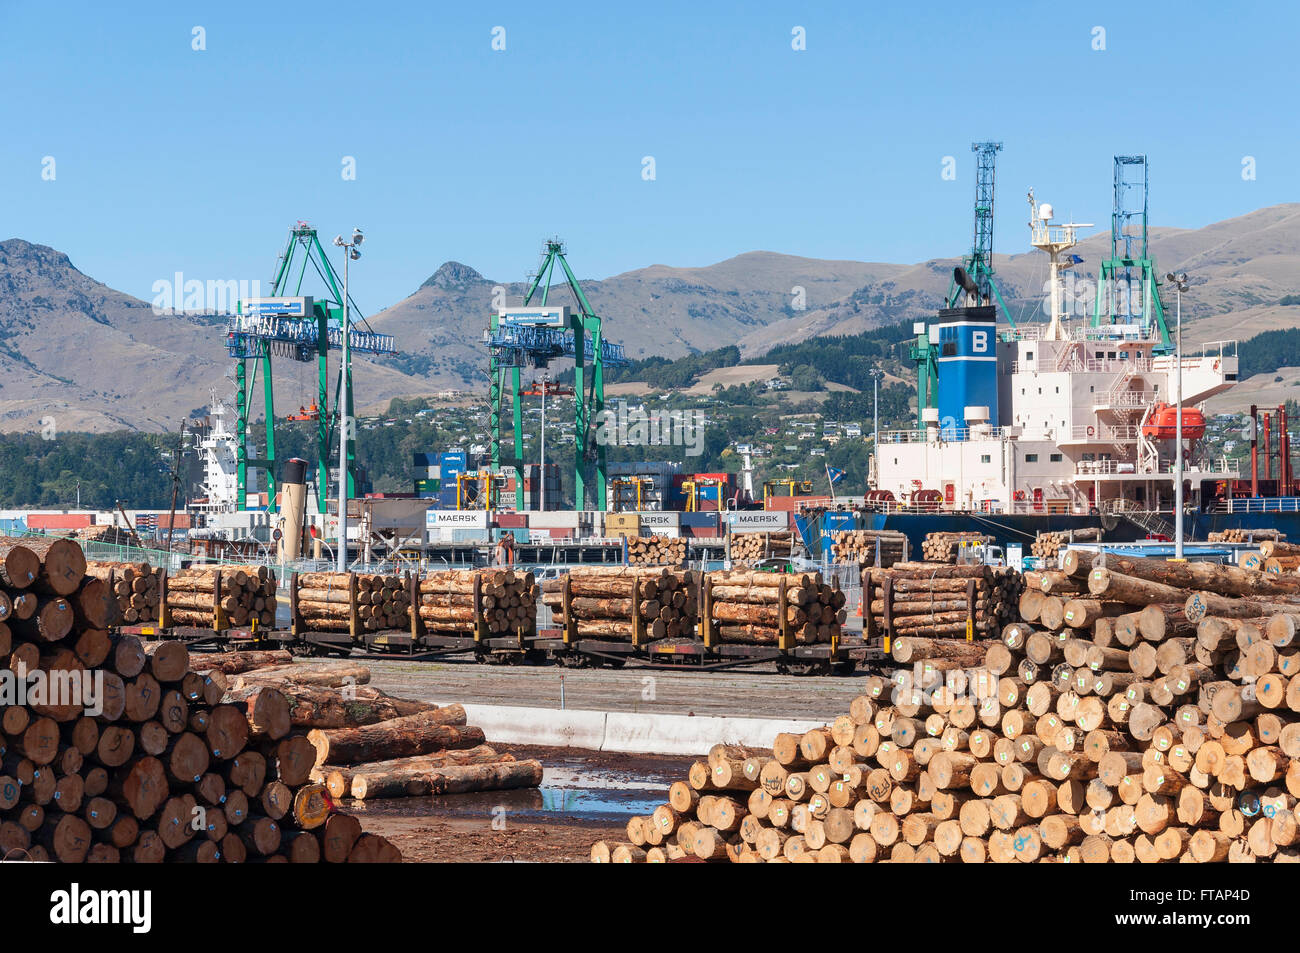 Piles of logs ready for loading at Container Port, Lyttelton Harbour, Lyttelton, Banks Peninsula, Canterbury, New Zealand Stock Photo